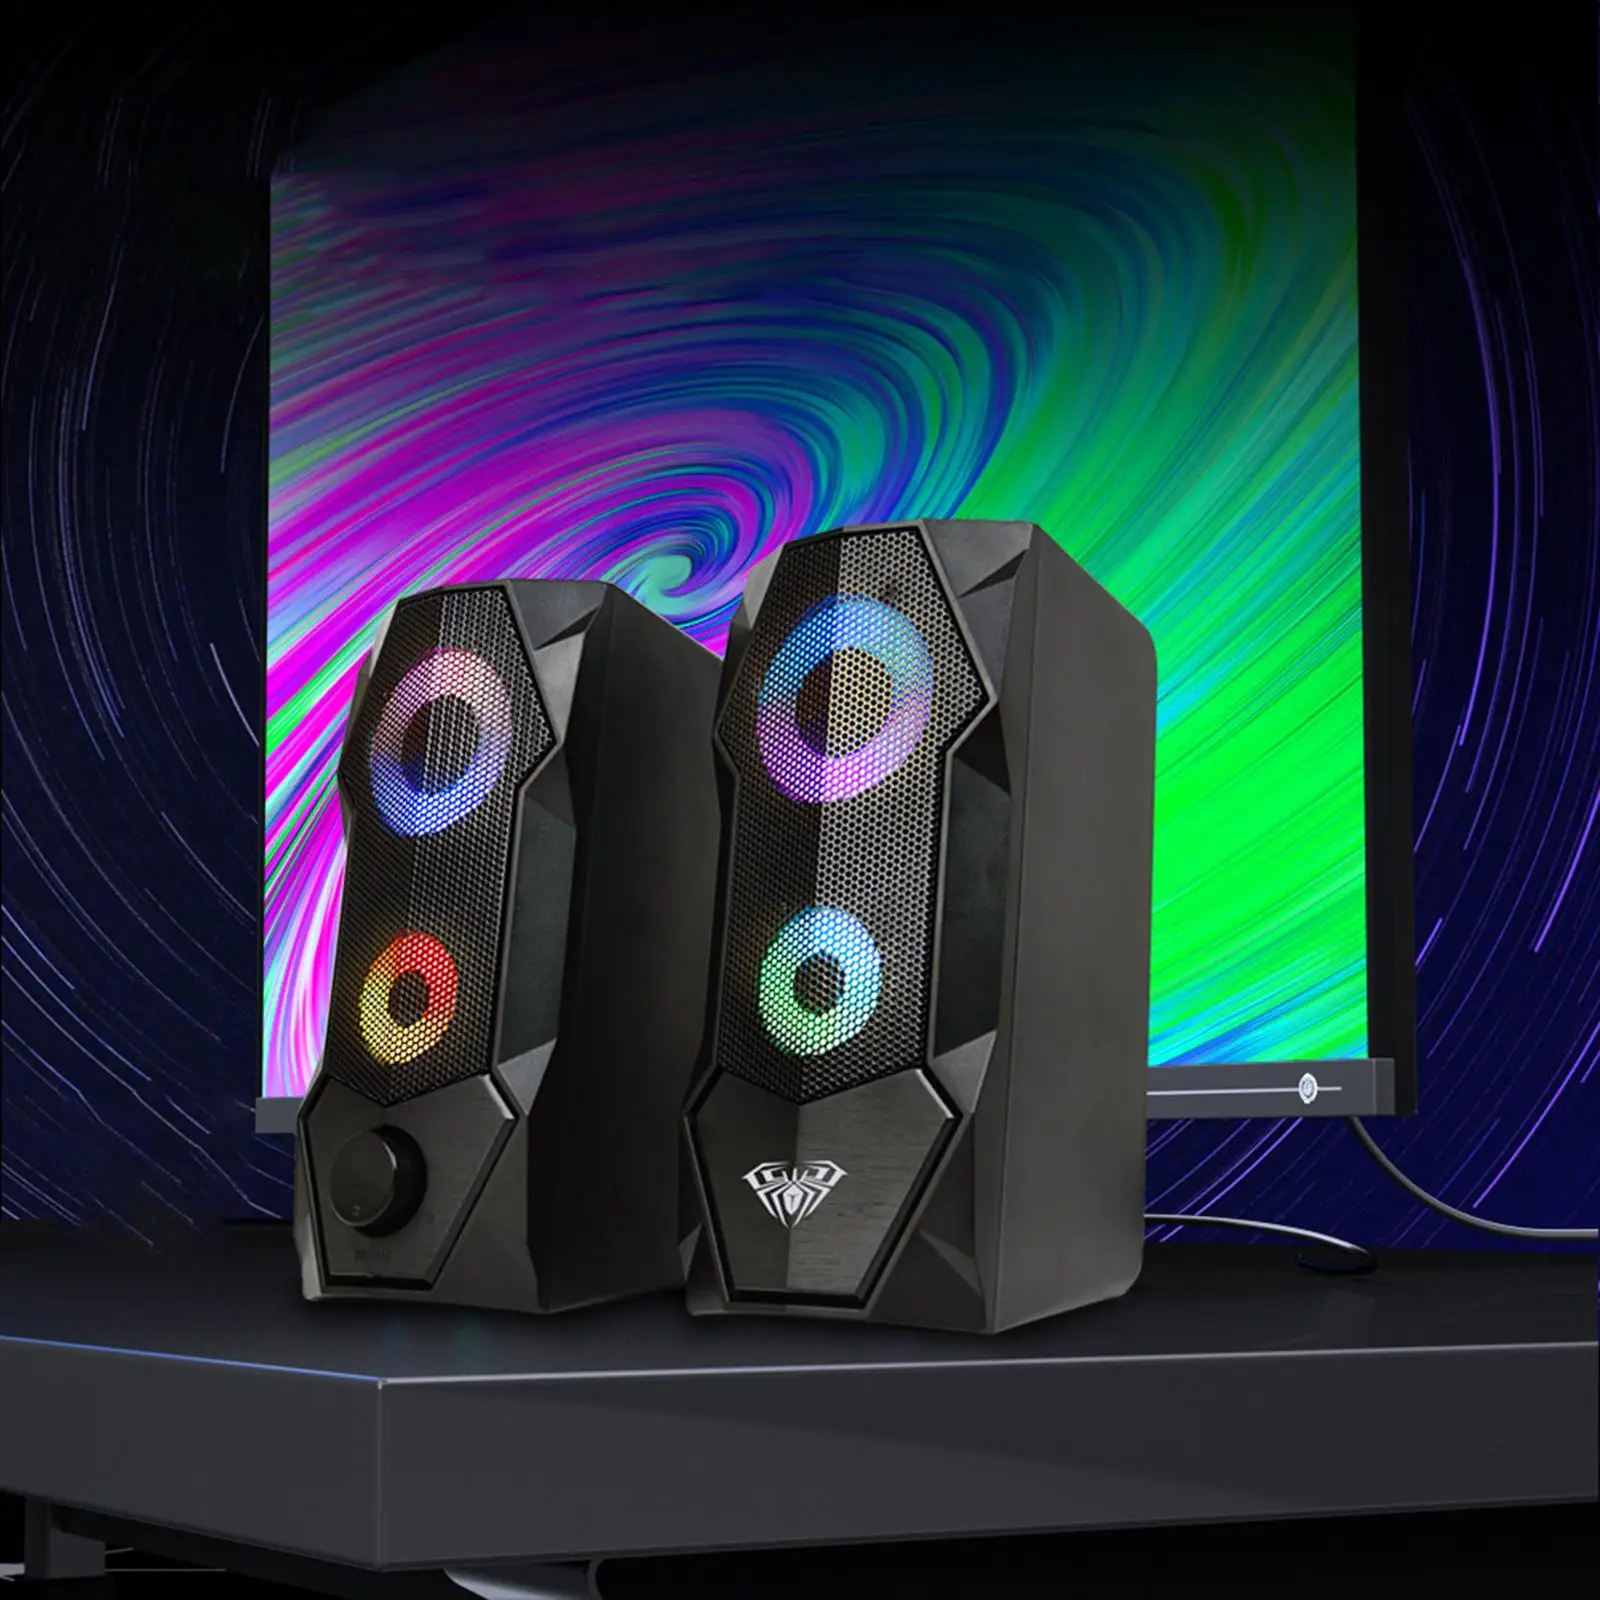 2 Pieces Computer Speakers with RGB Light Stereo Surround for Phone Desktops